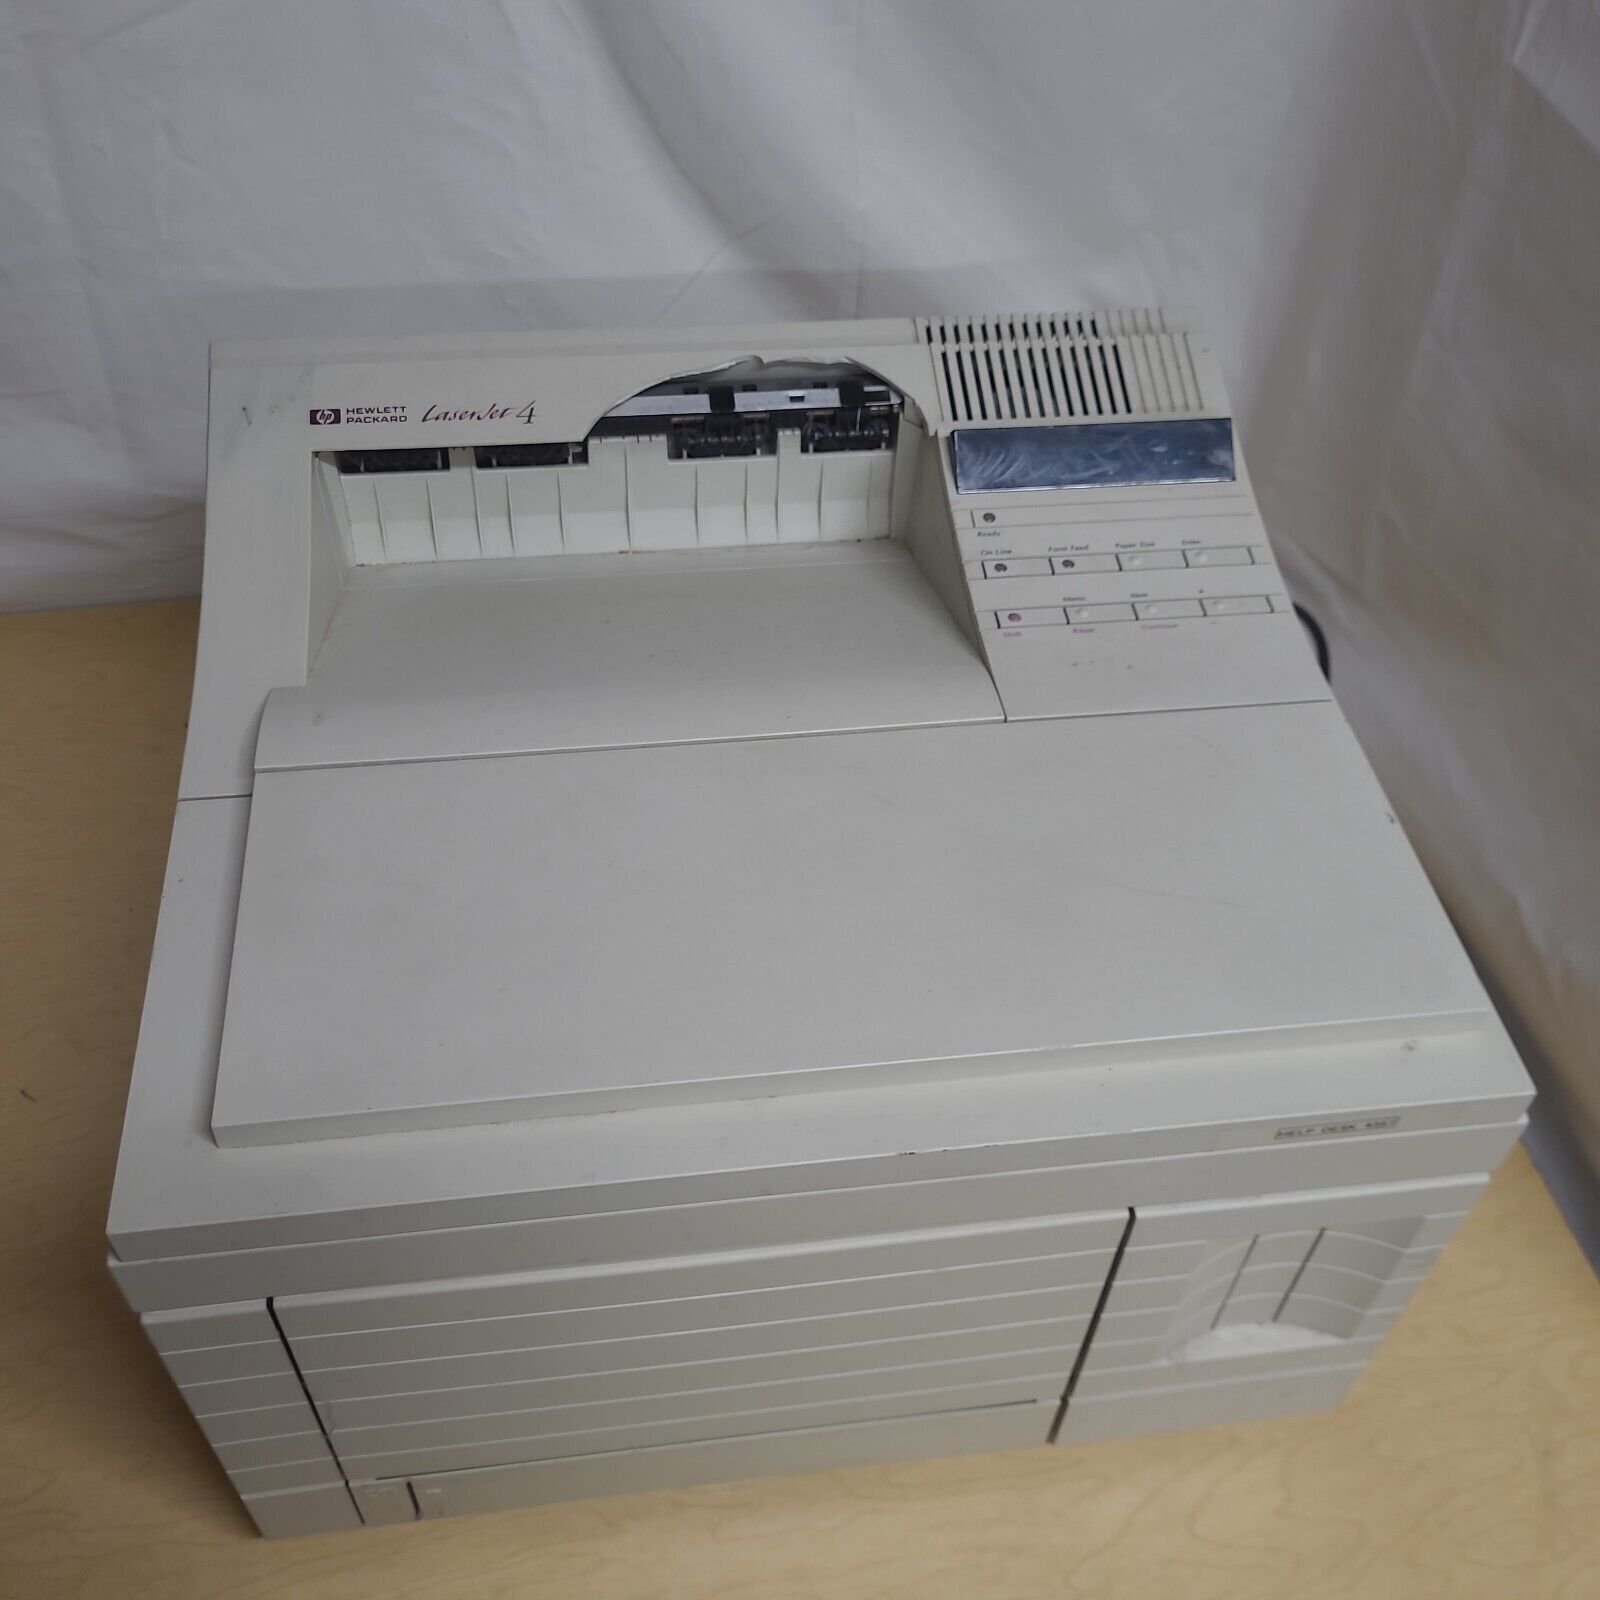 NO POWER AS IS PARTS ONLY HP LaserJet 4 C2001A 1993 Printer Vintage See Info